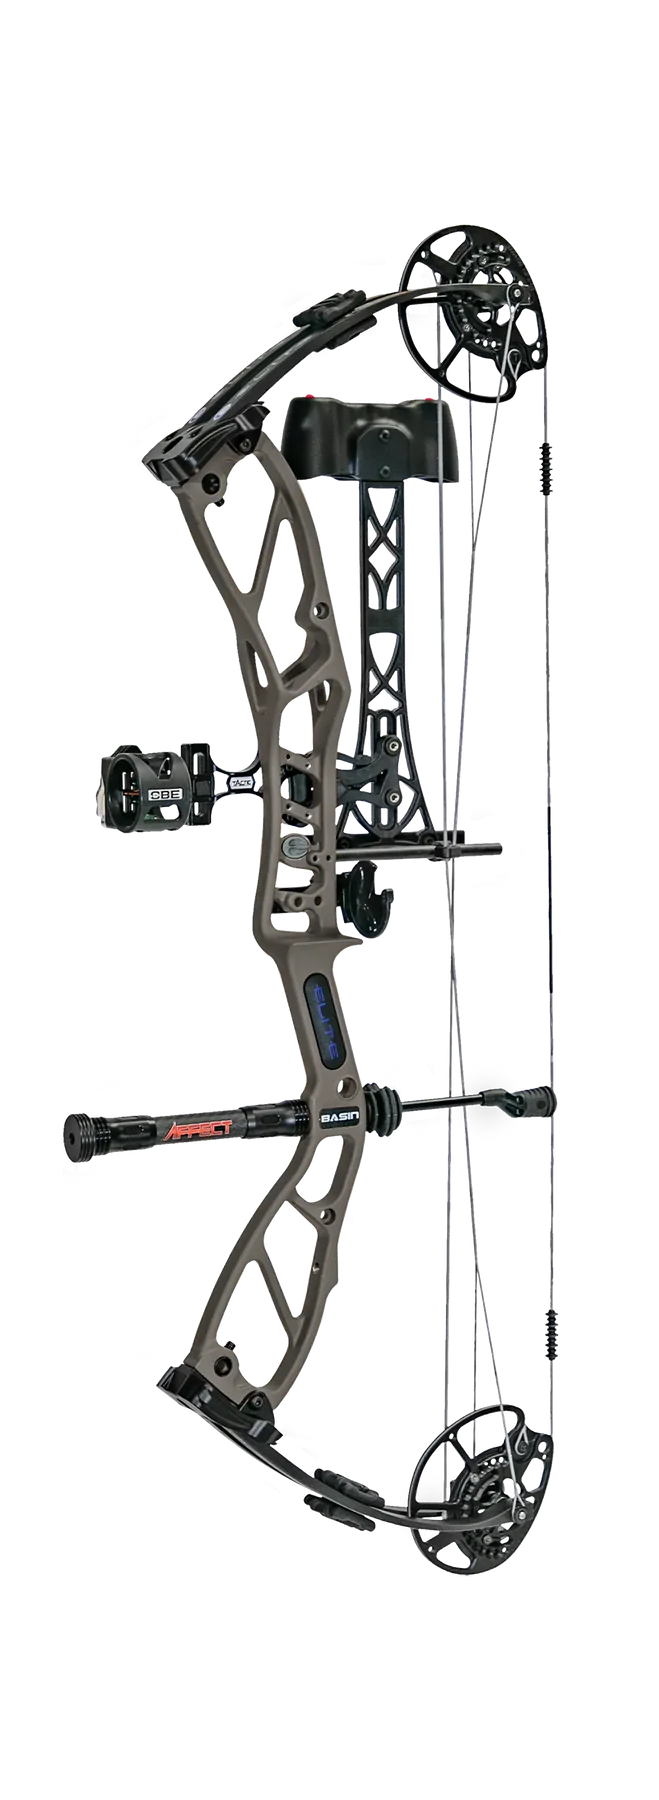 Elite Basin RTS Compound Bow Package